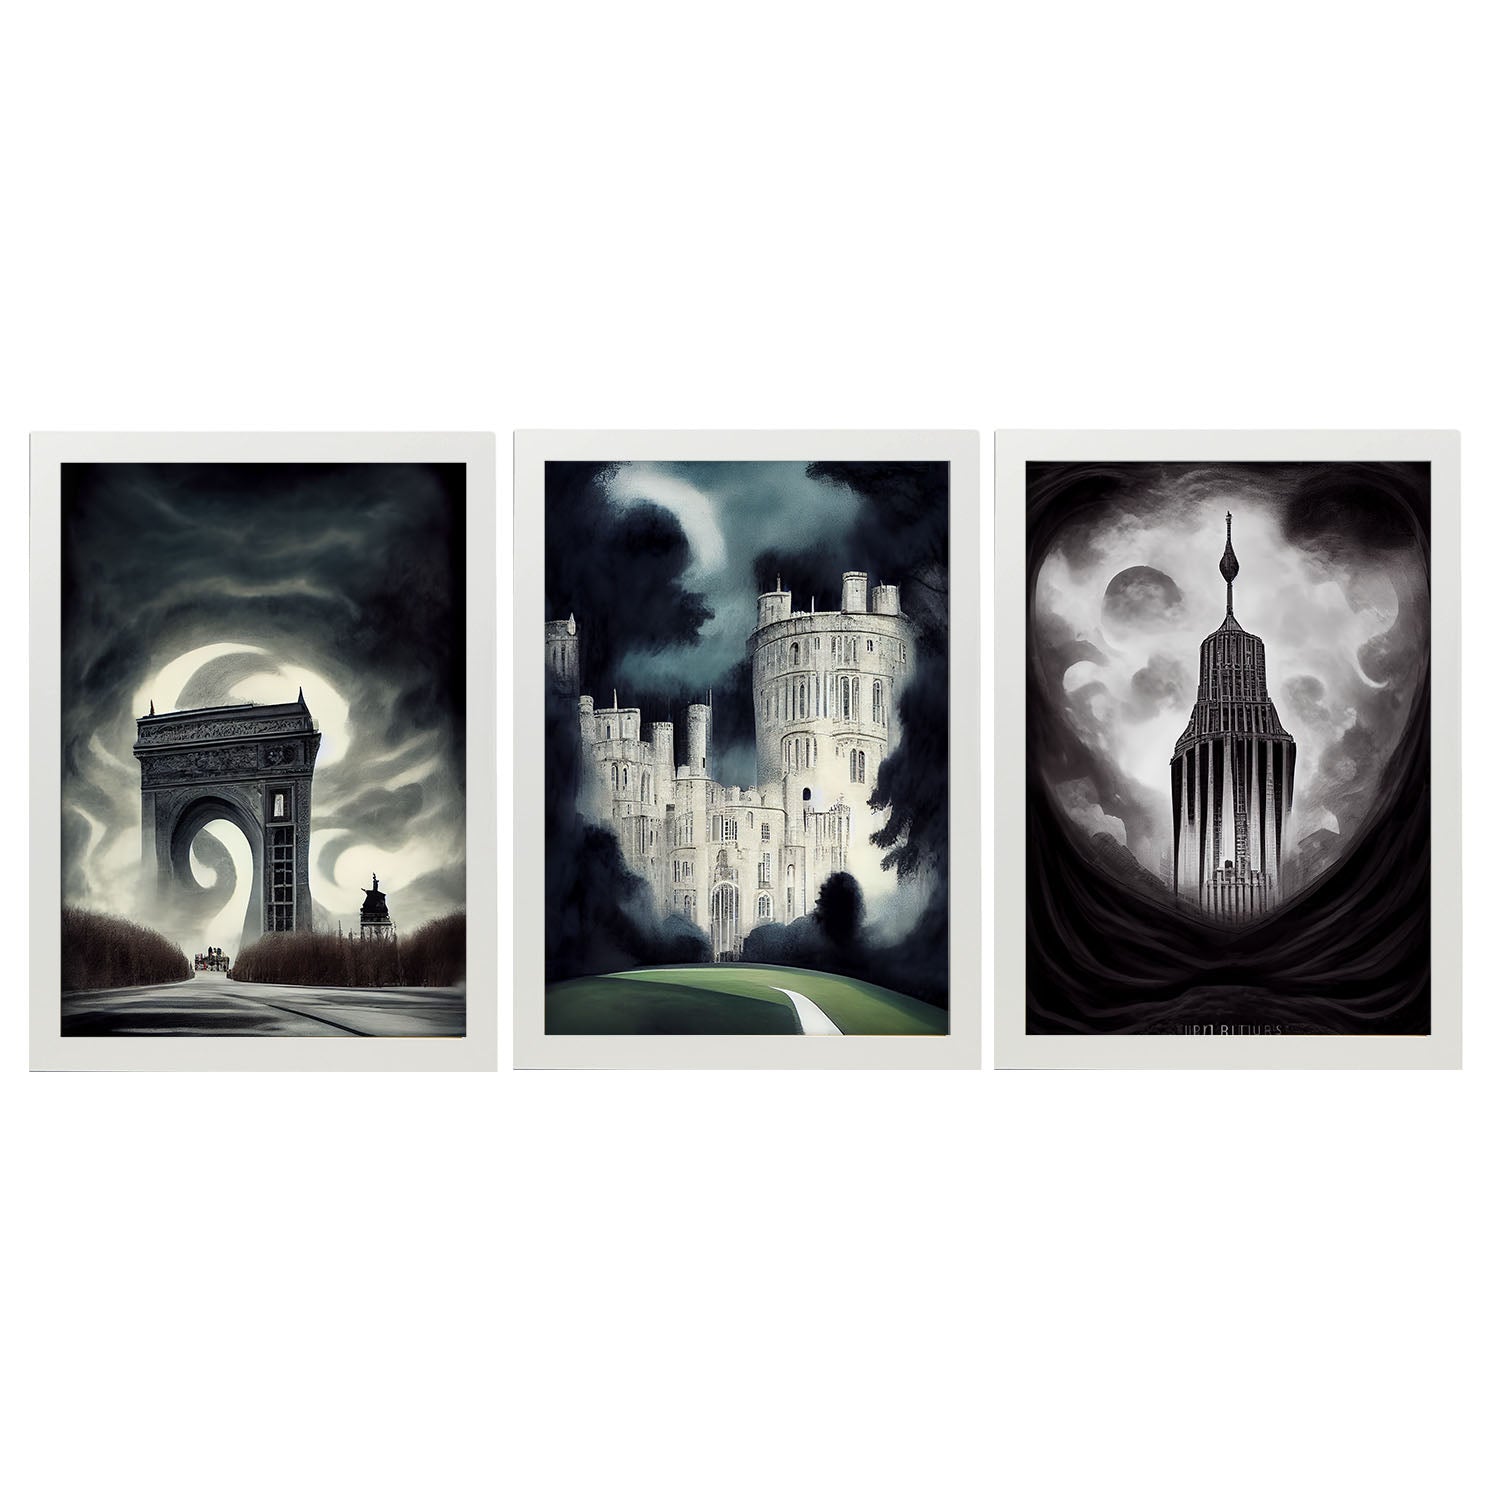 Burton style Illustrations of monuments and cities inspired by Burton's Dark and Goth art Interior Design and Decoration Set Collection 2-Artwork-Nacnic-A4-Marco Blanco-Nacnic Estudio SL